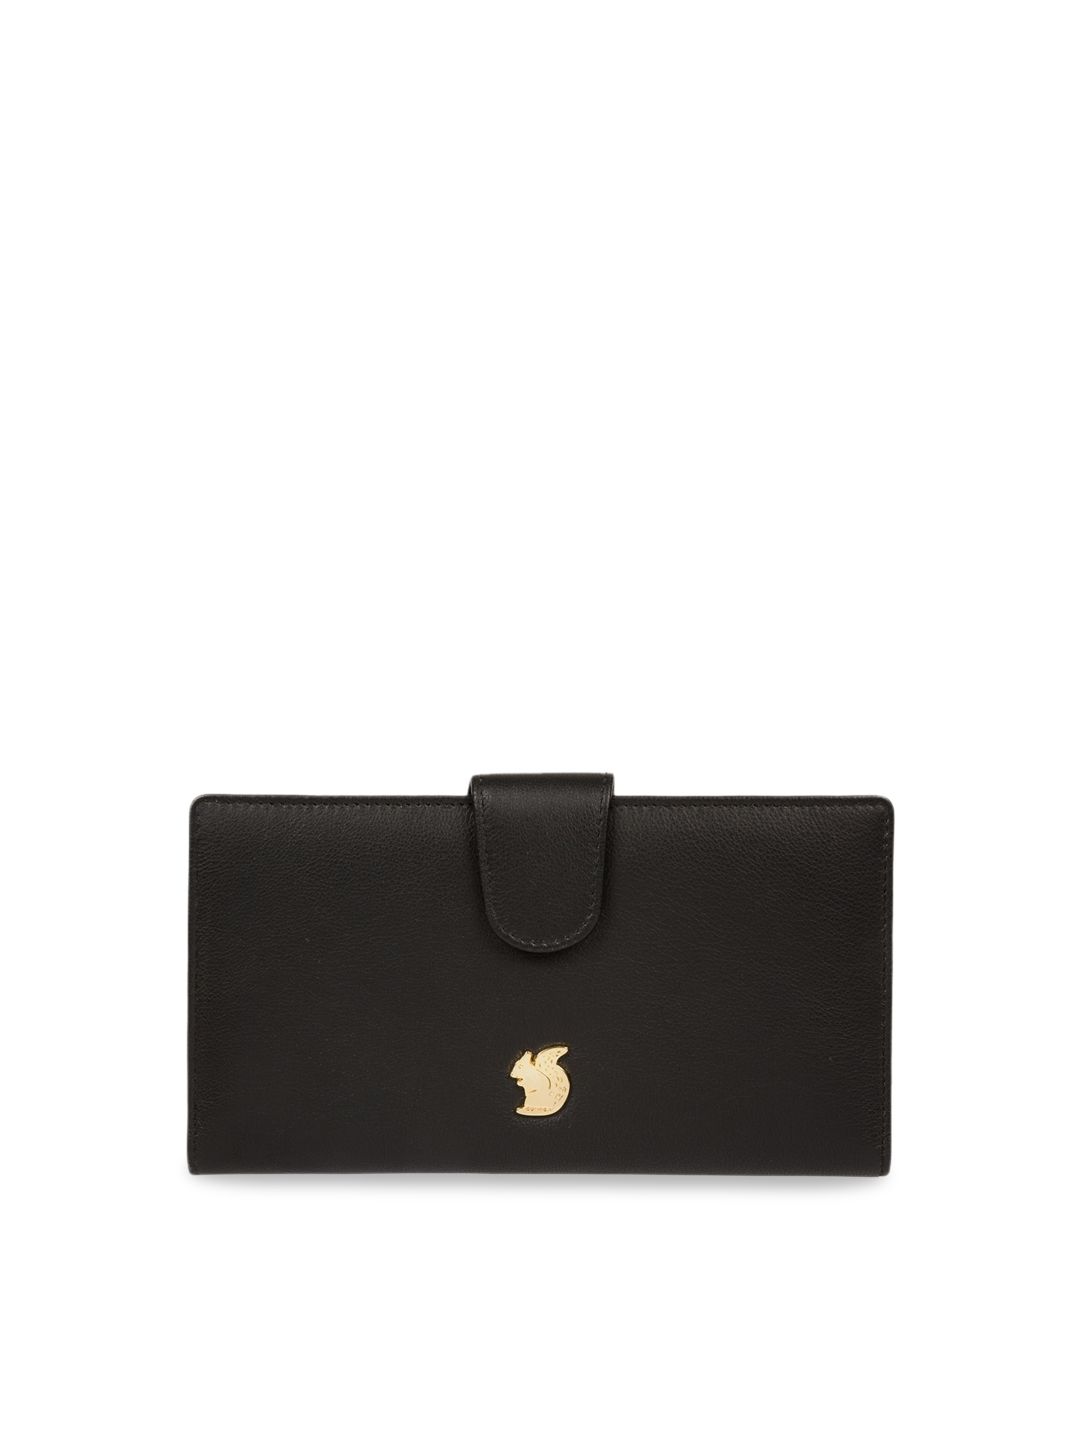 PURE LUXURIES LONDON Women Black Solid Leather Card Holder Price in India